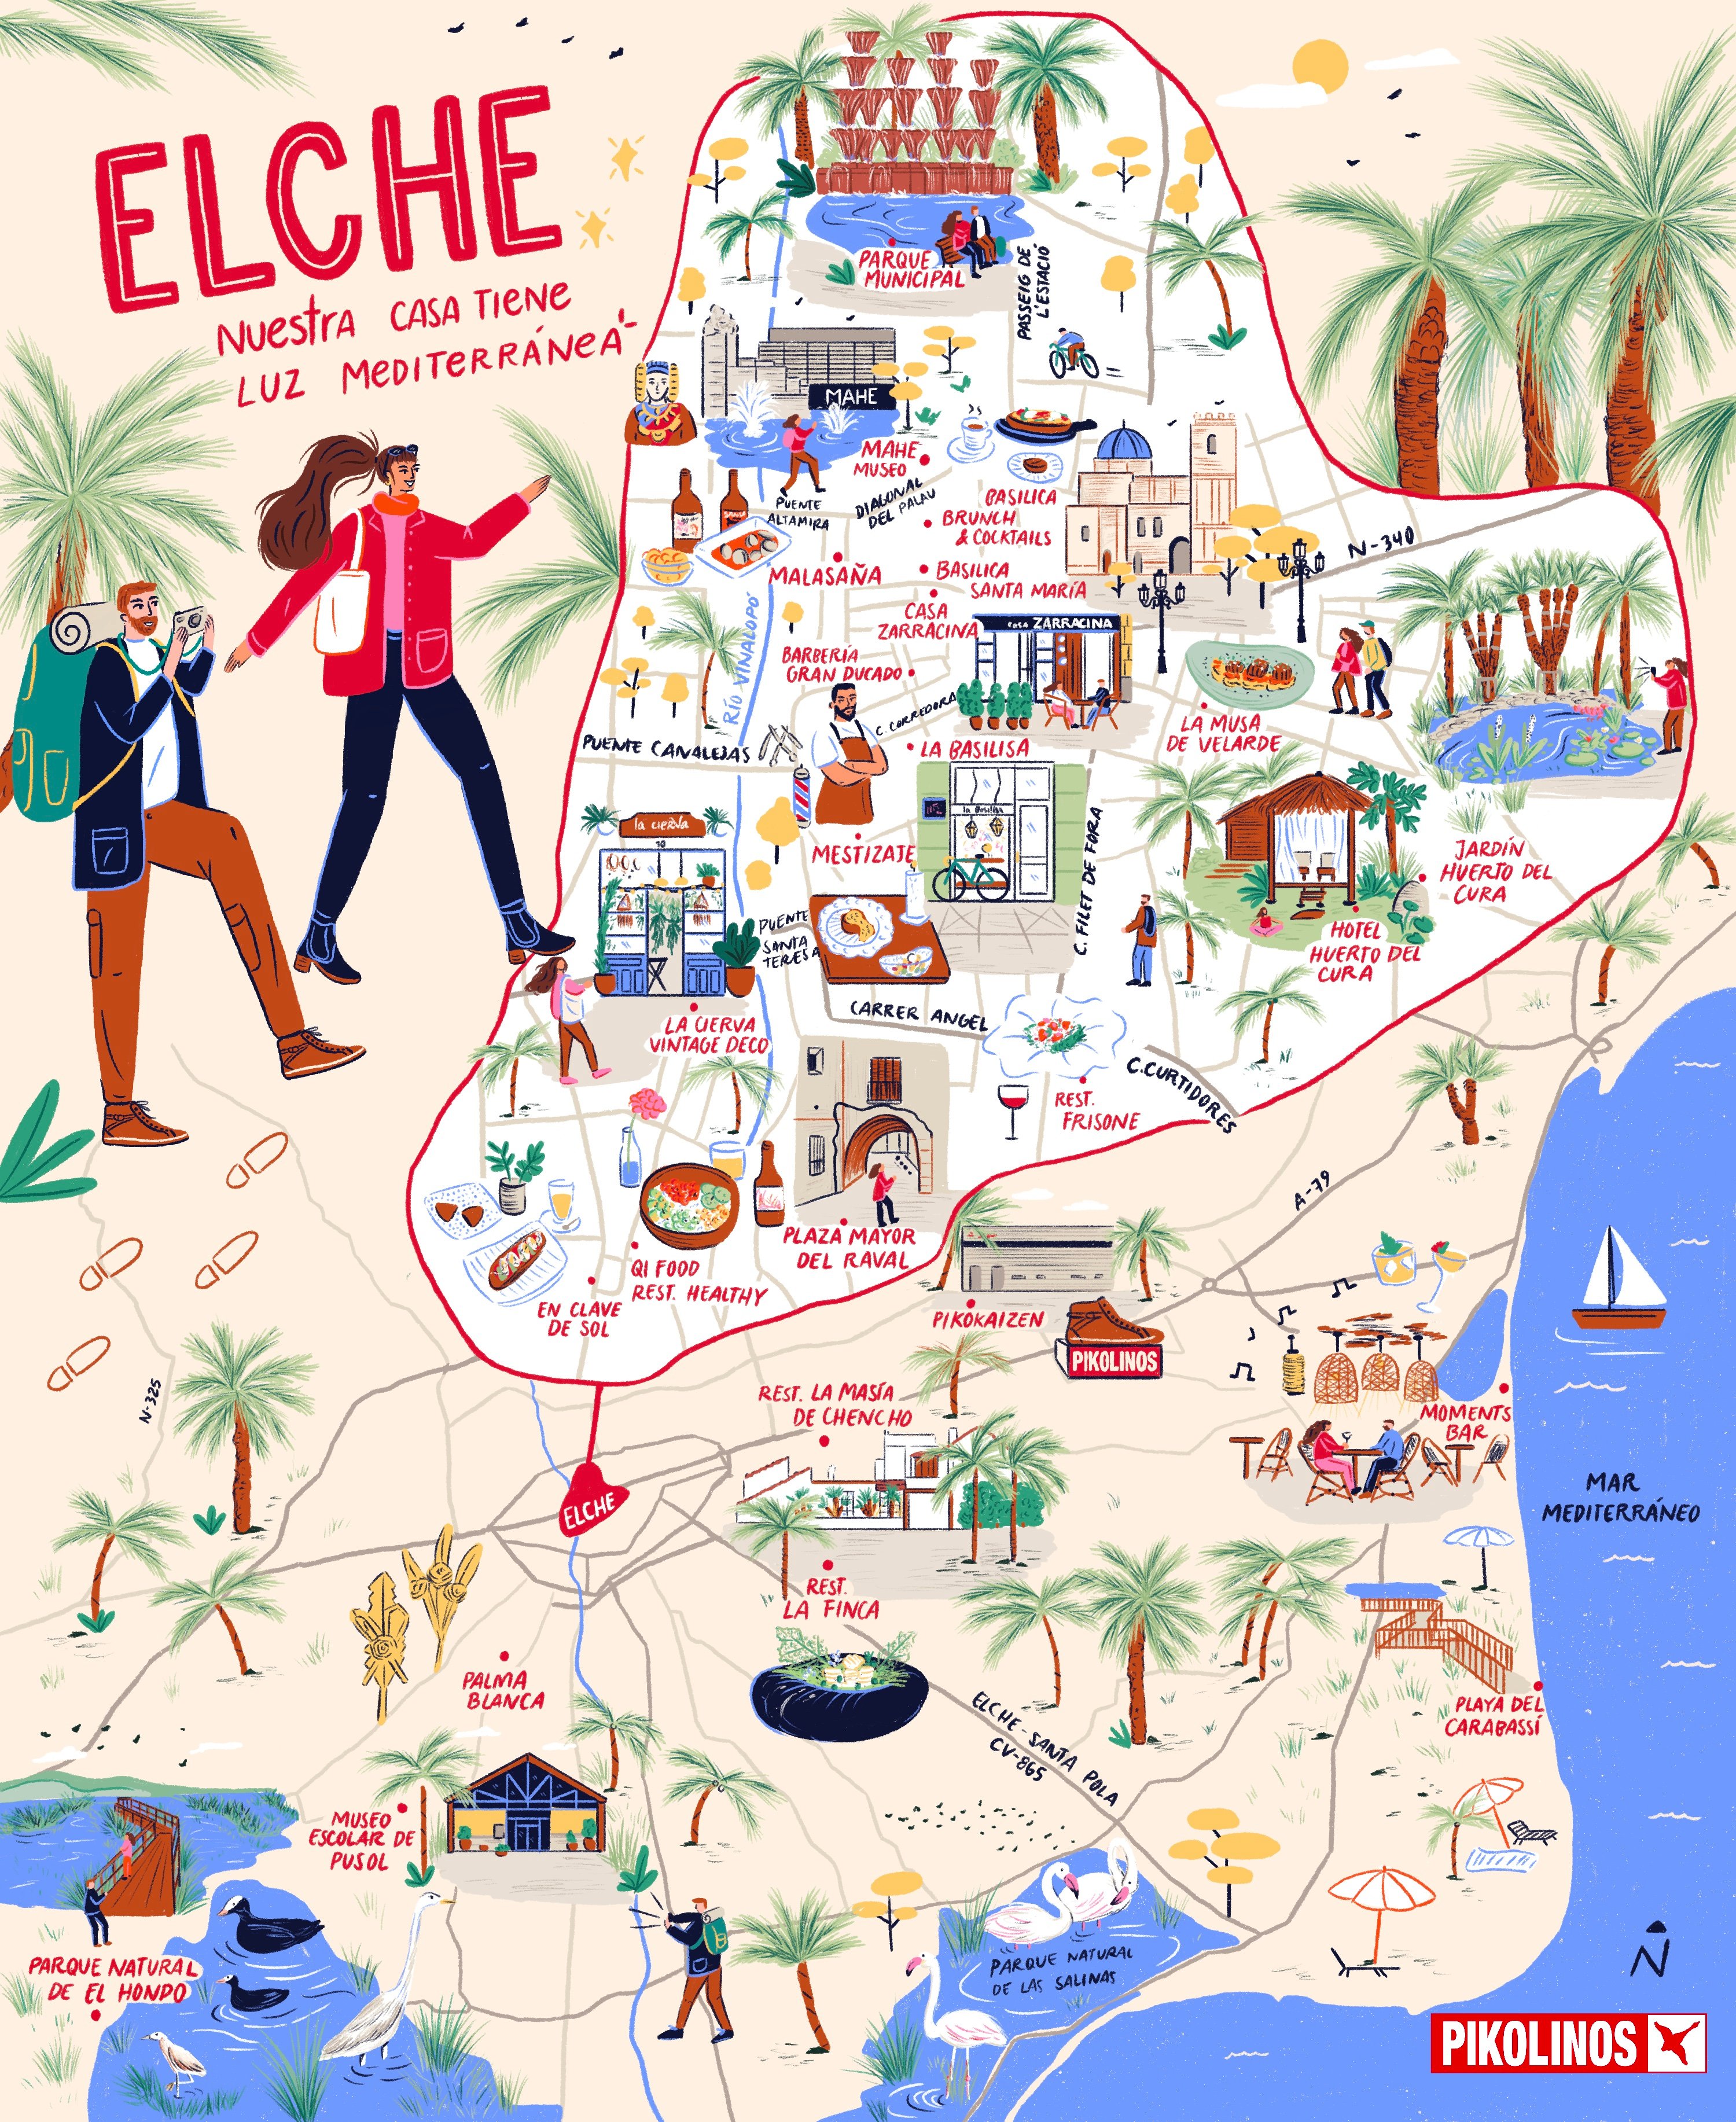 Illustrated map of the city of Elche